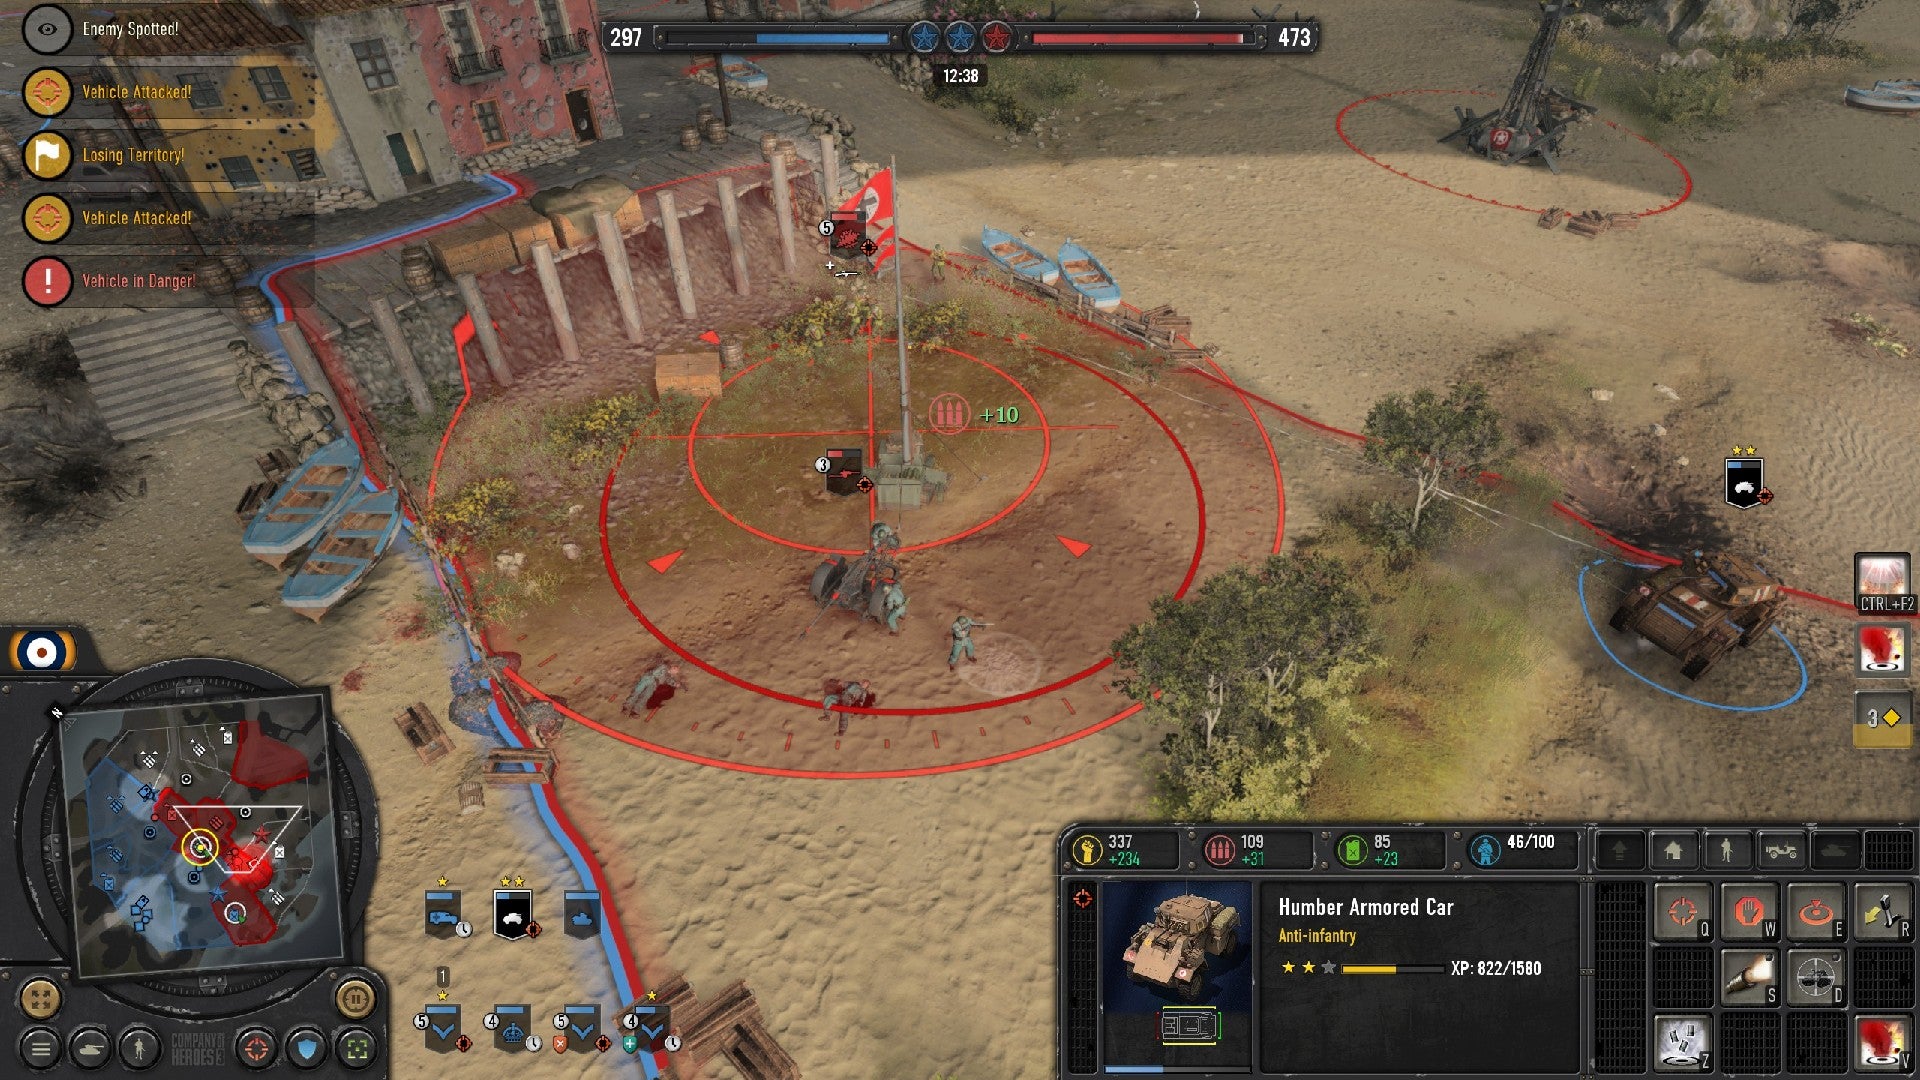 Company of Heroes 3 image showing enemy squads highlighted by an artillery marker.